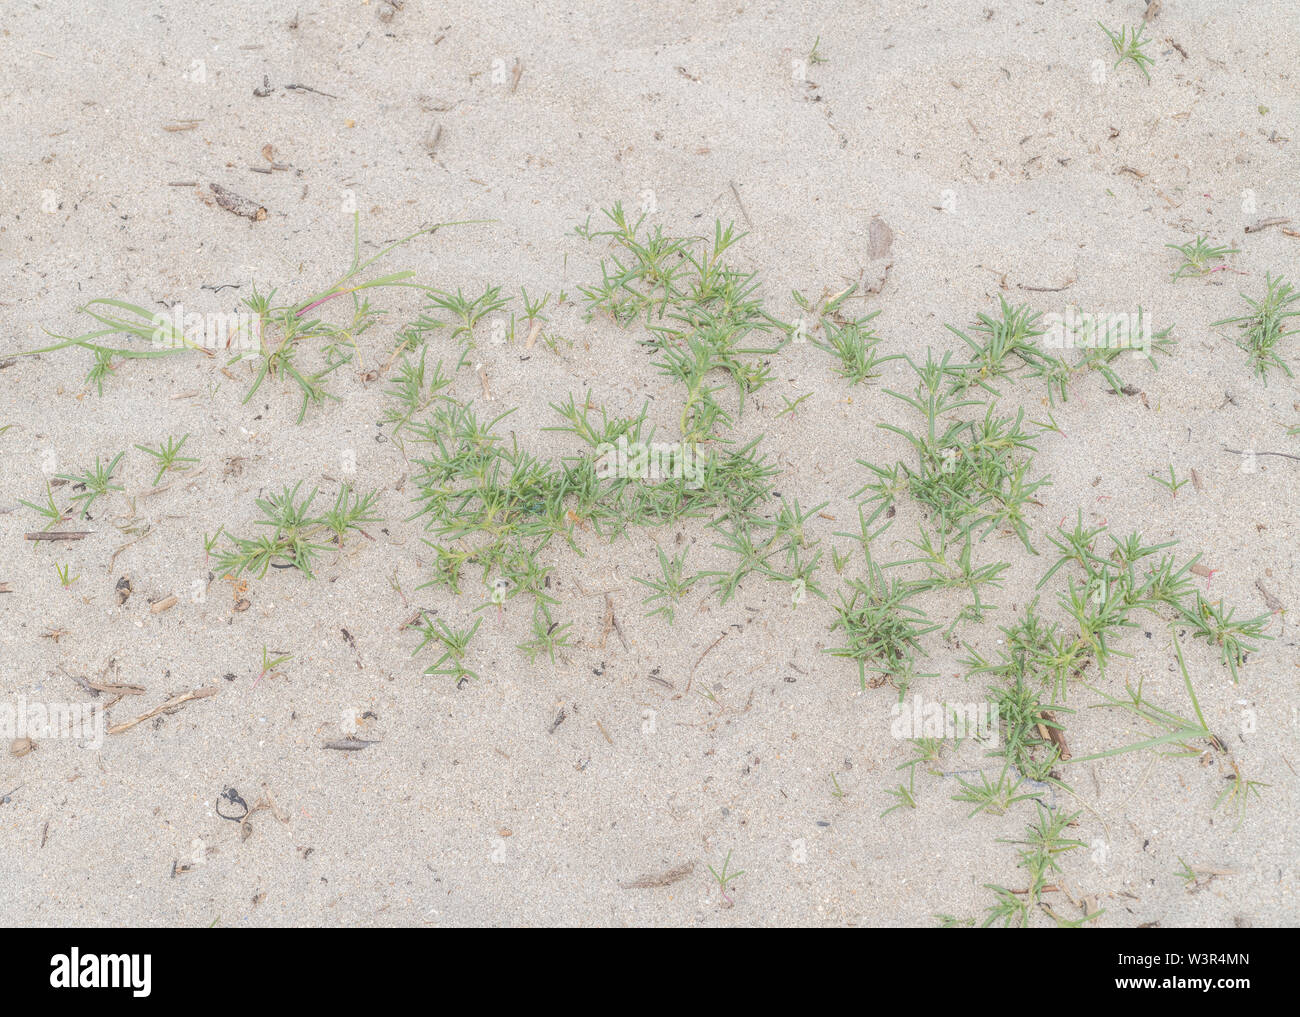 Mid-summer foliage /  leaves of Prickly Saltwort / Salsola kali on a sandy beach. Once used as a source of soda in glass-making. Stock Photo